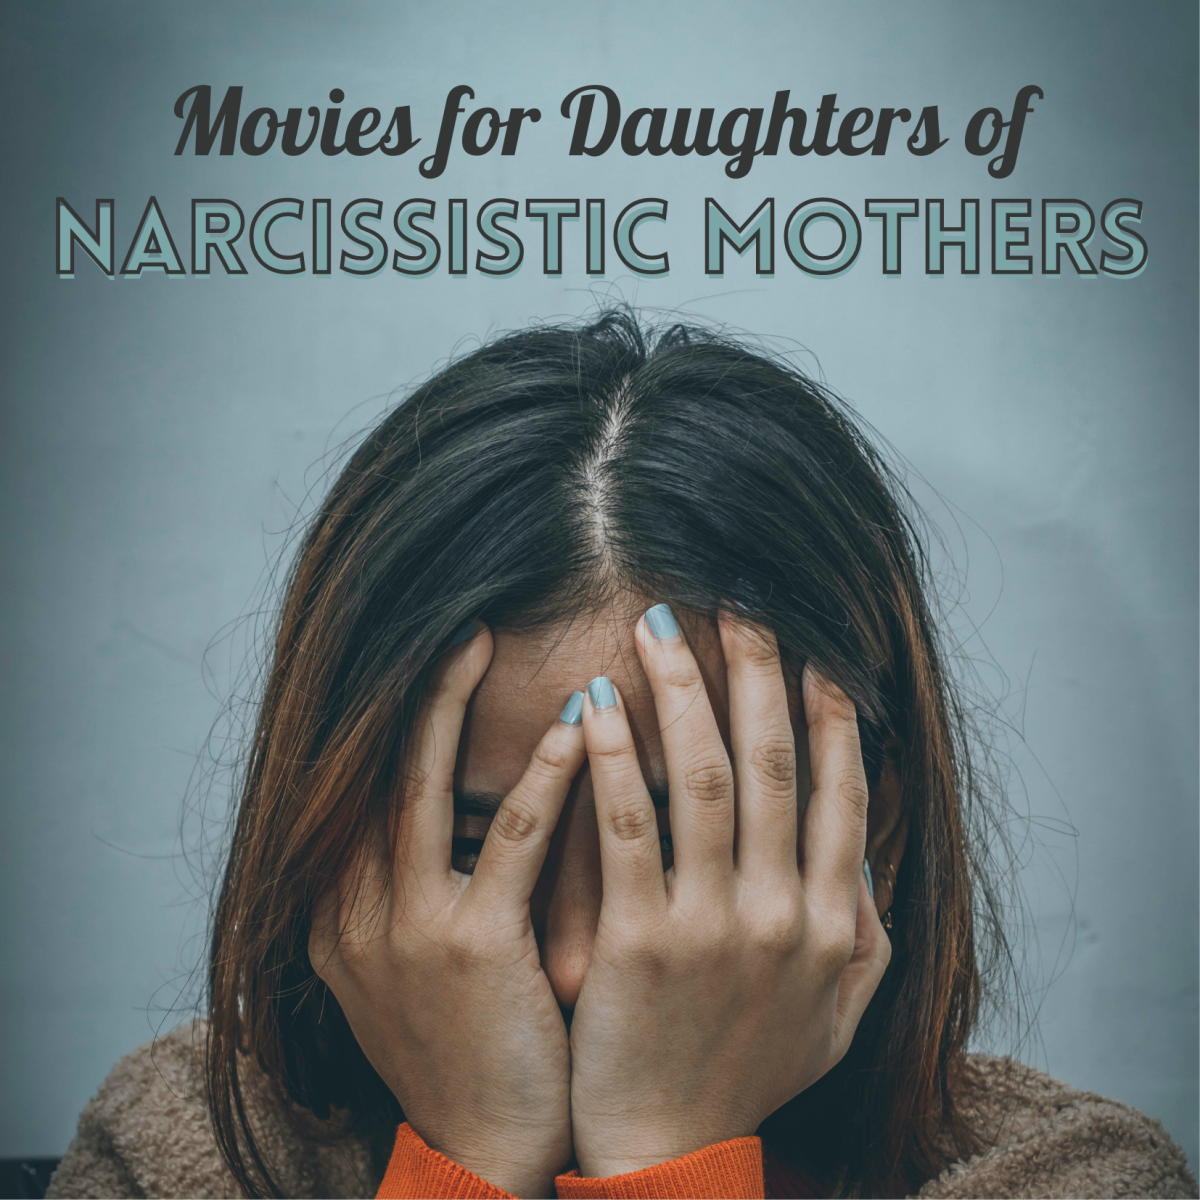 Is your mother a narcissist? Watch these seven movies to feel like you're not alone.